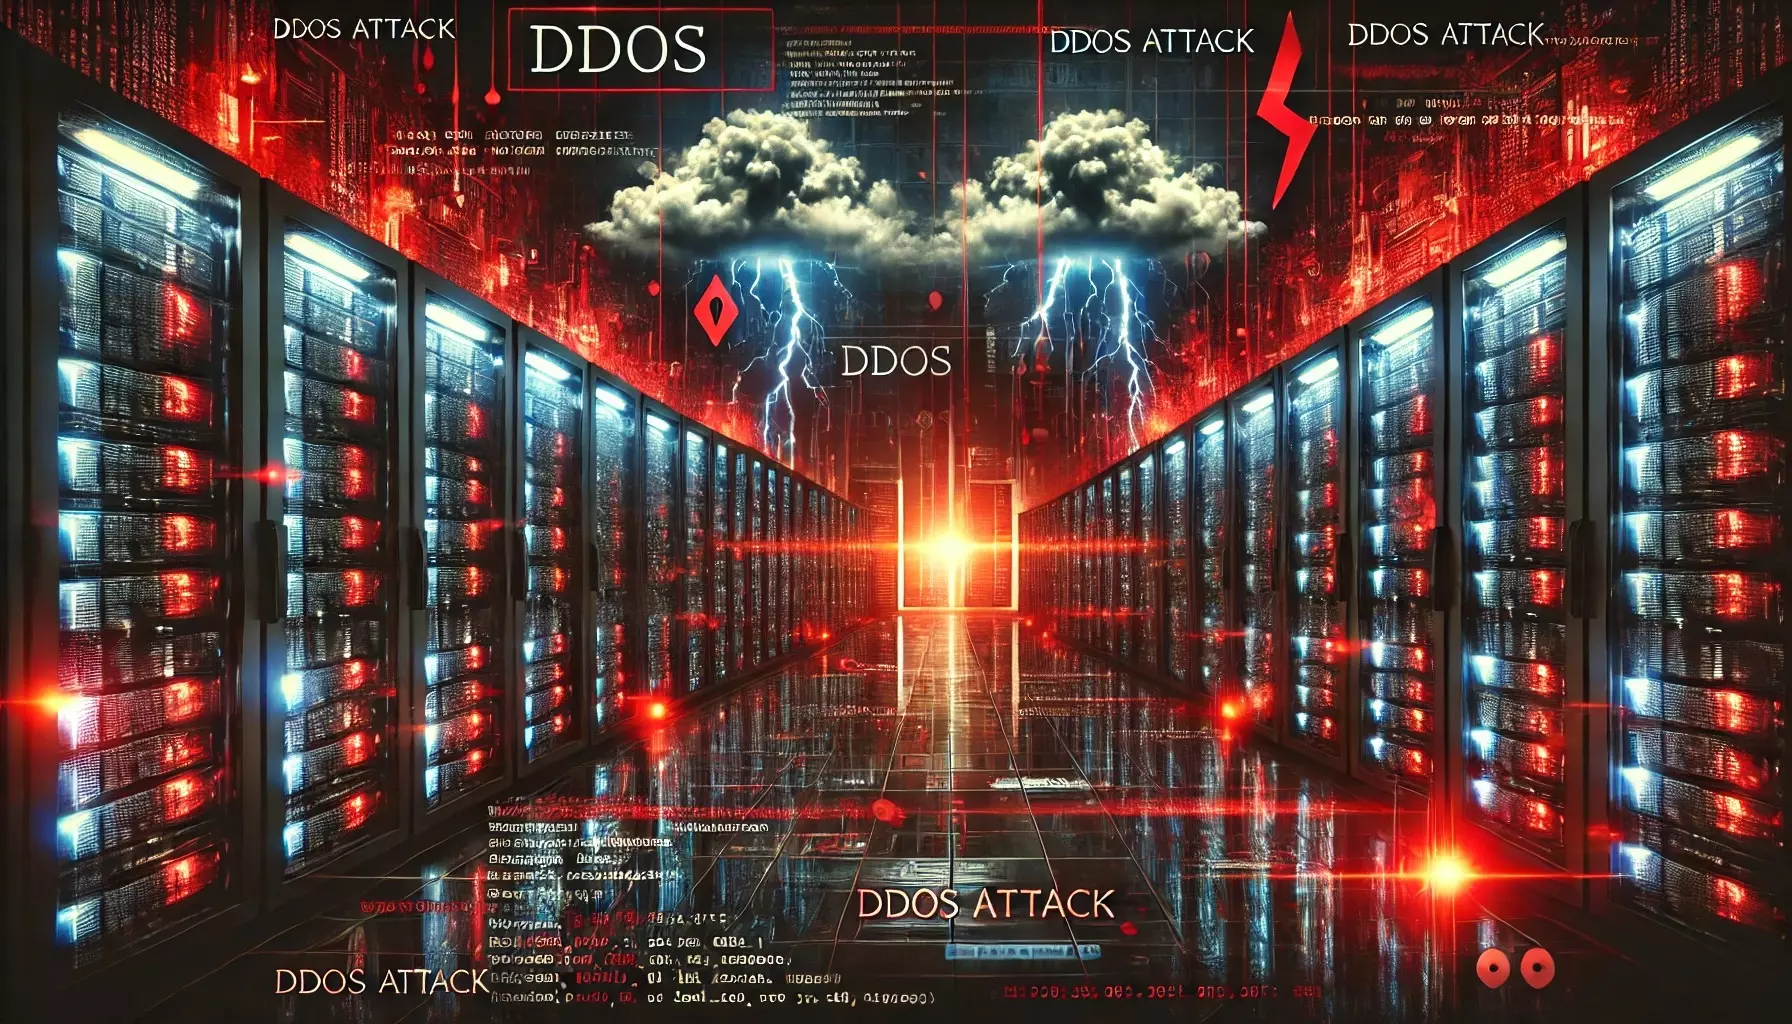 BISTRO BUDDY Endures Malicious DDoS Attack, Rallies for Community Support